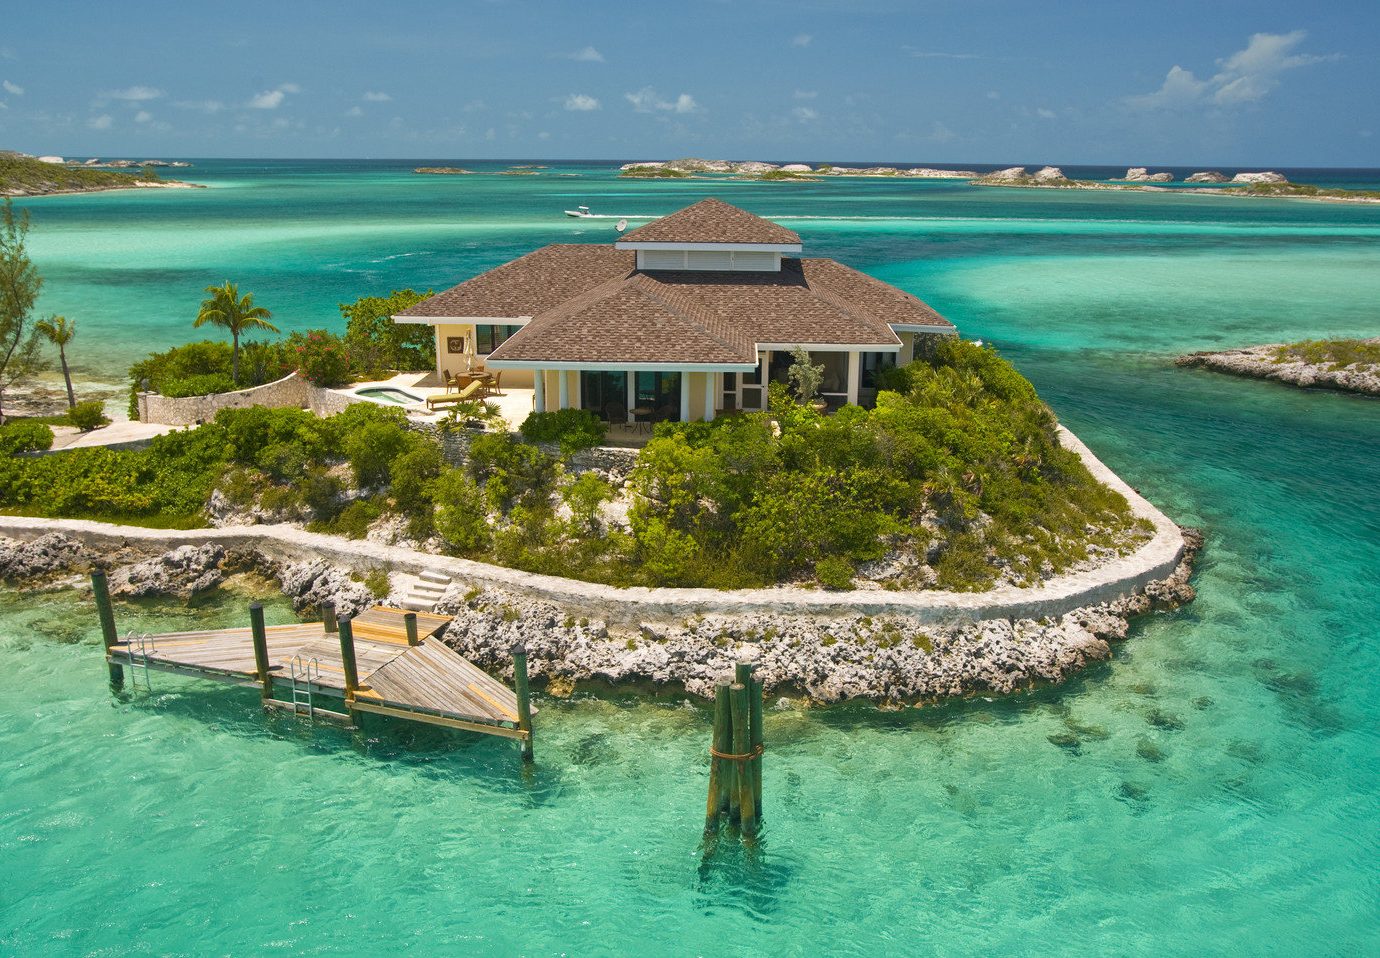 The 8 BEST AllInclusive Resorts in the Bahamas with 